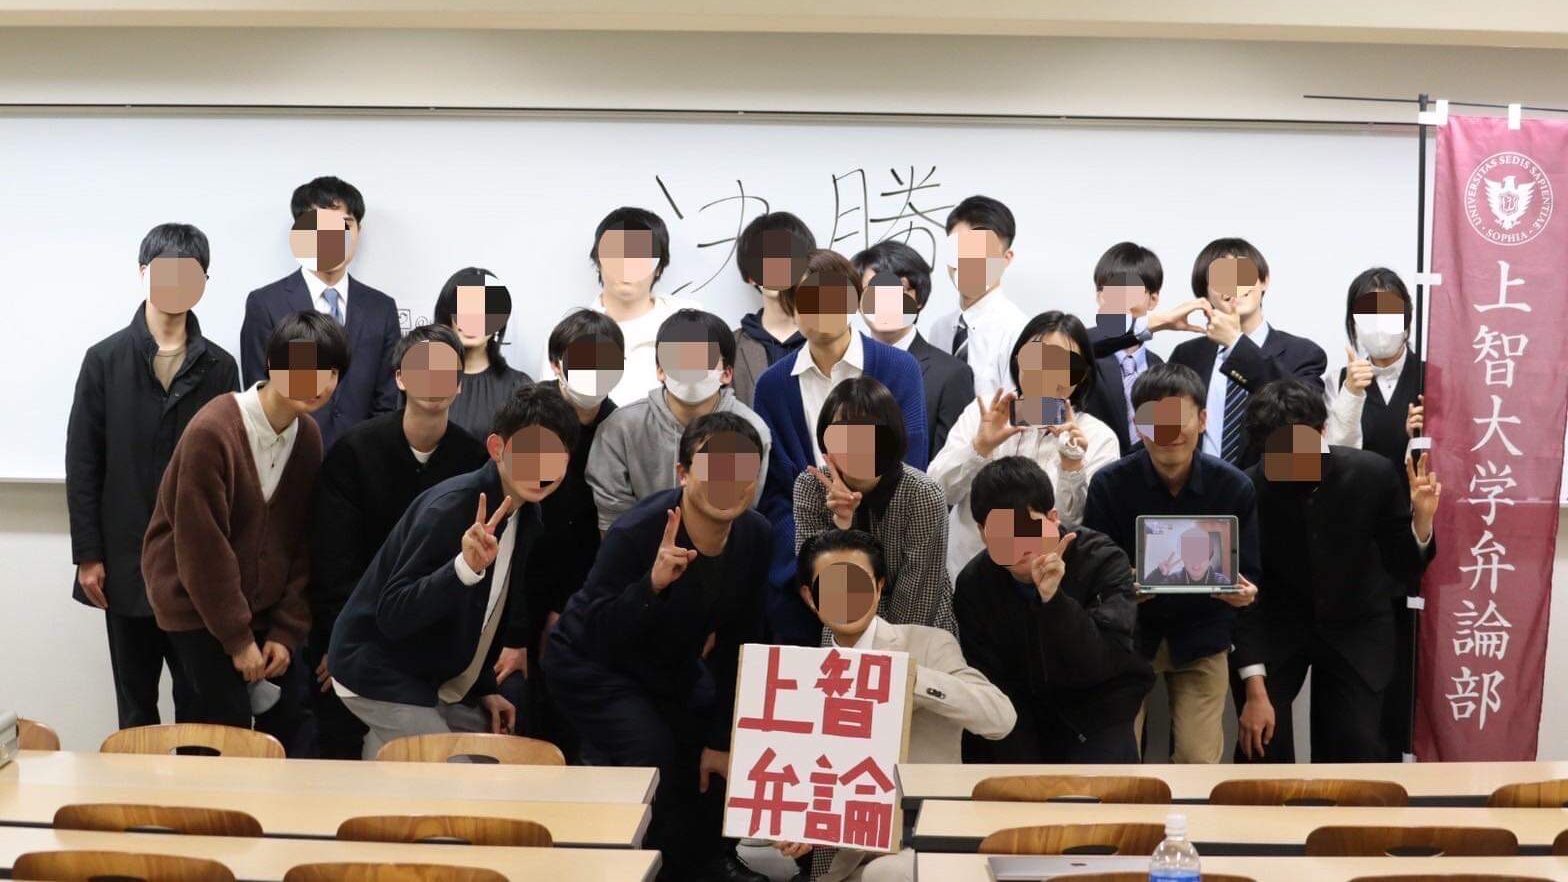 You are currently viewing 2023年3月12日 に 第２回 上智大学弁論部杯争奪全日本大学ディベート大会 が開催されました